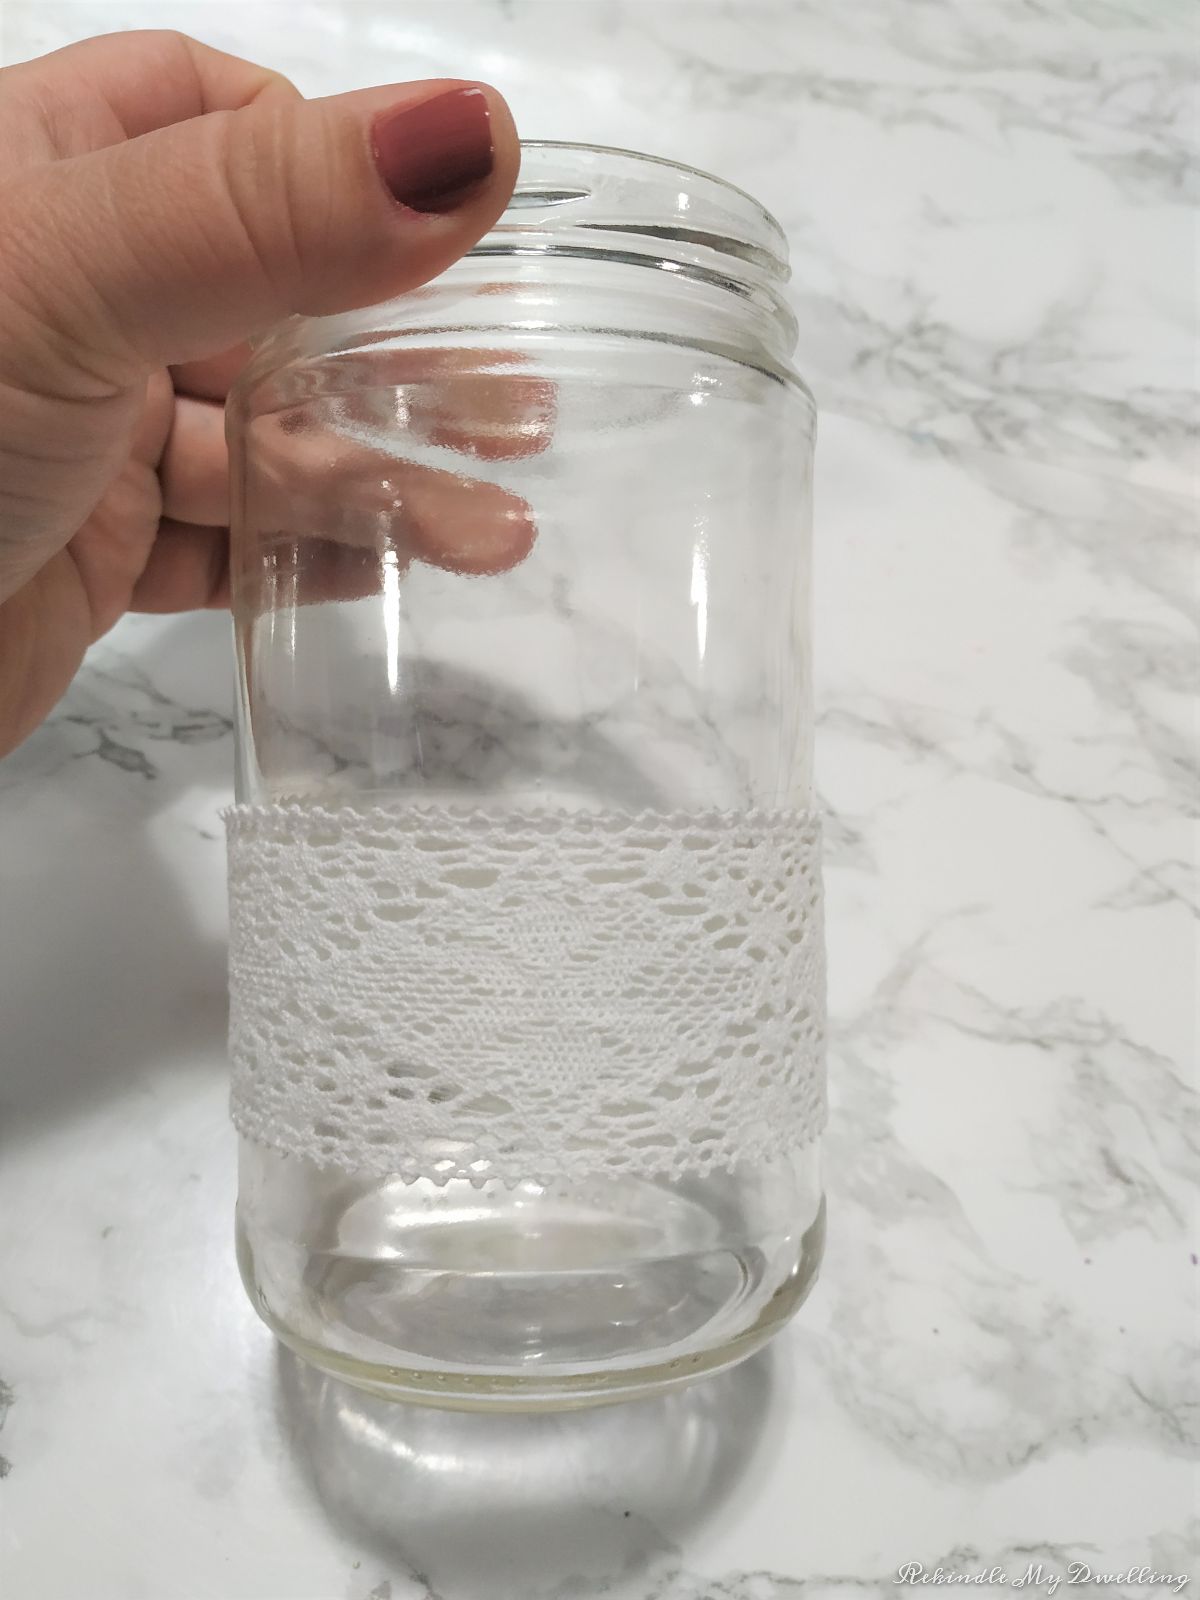 A hand holding a mason jar tied with lace fabric.